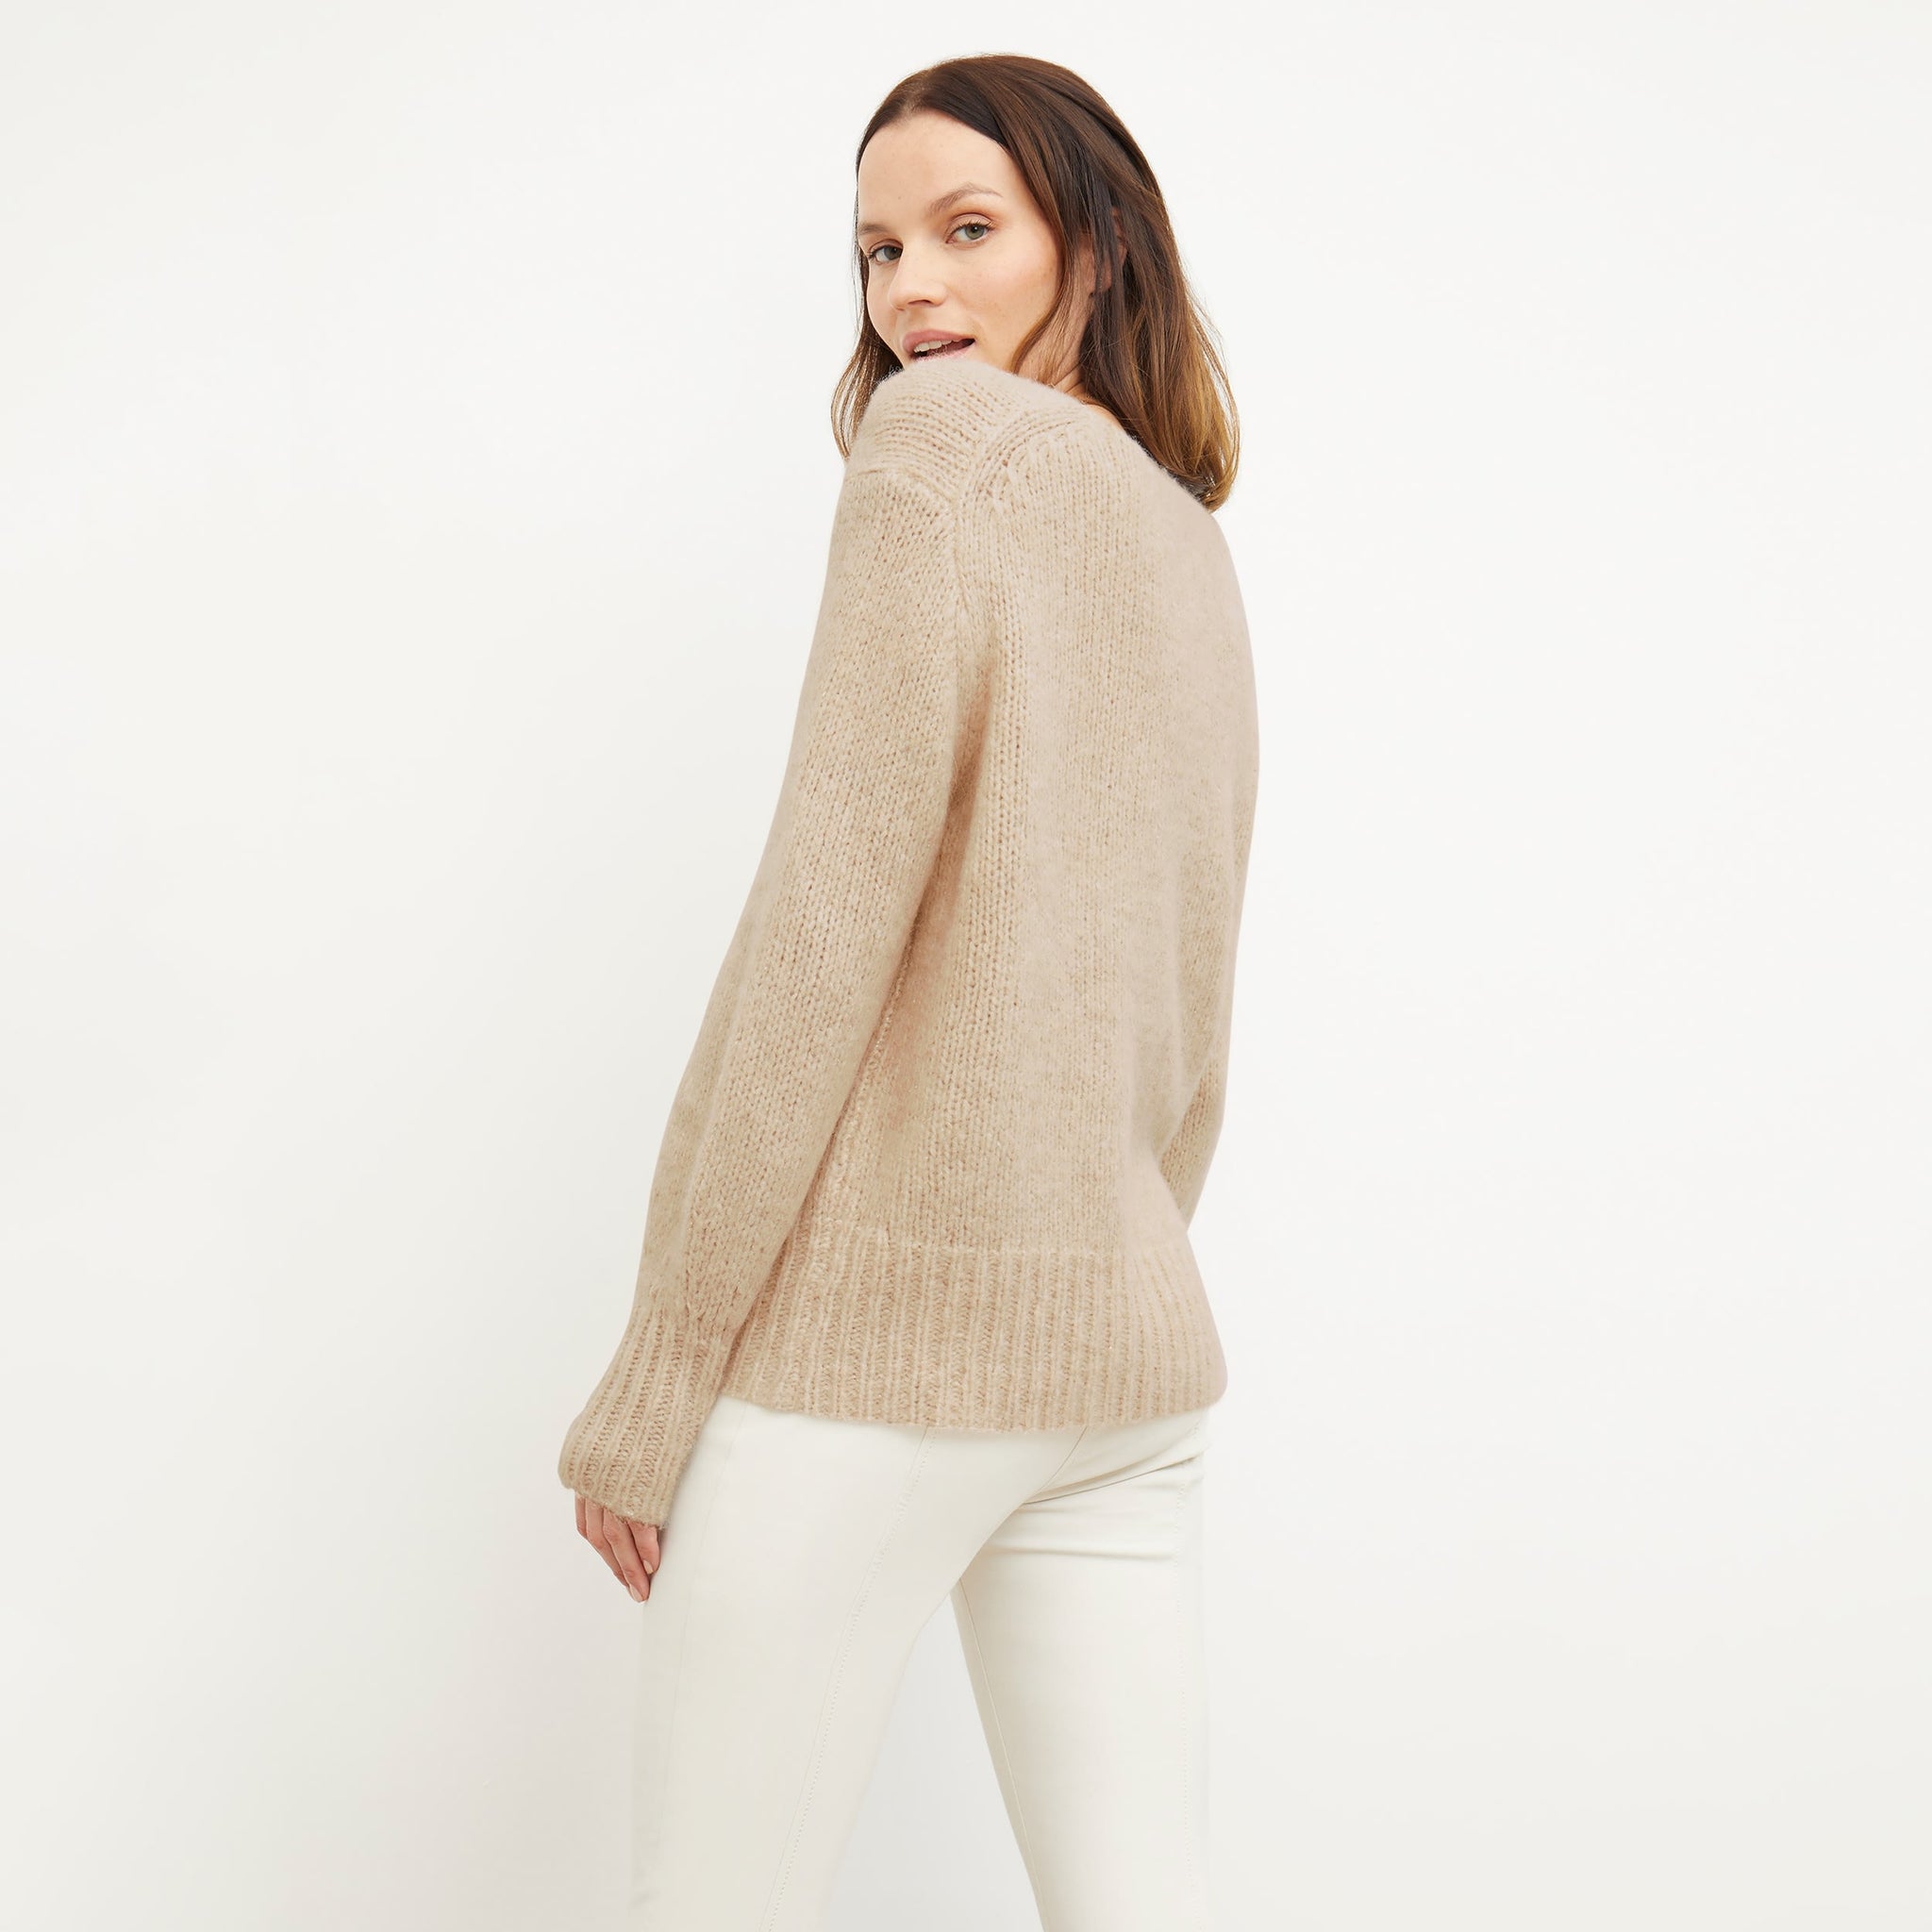 Back image of a woman standing wearing the Cathy Sweater—Glimmer Alpaca in Jasmine